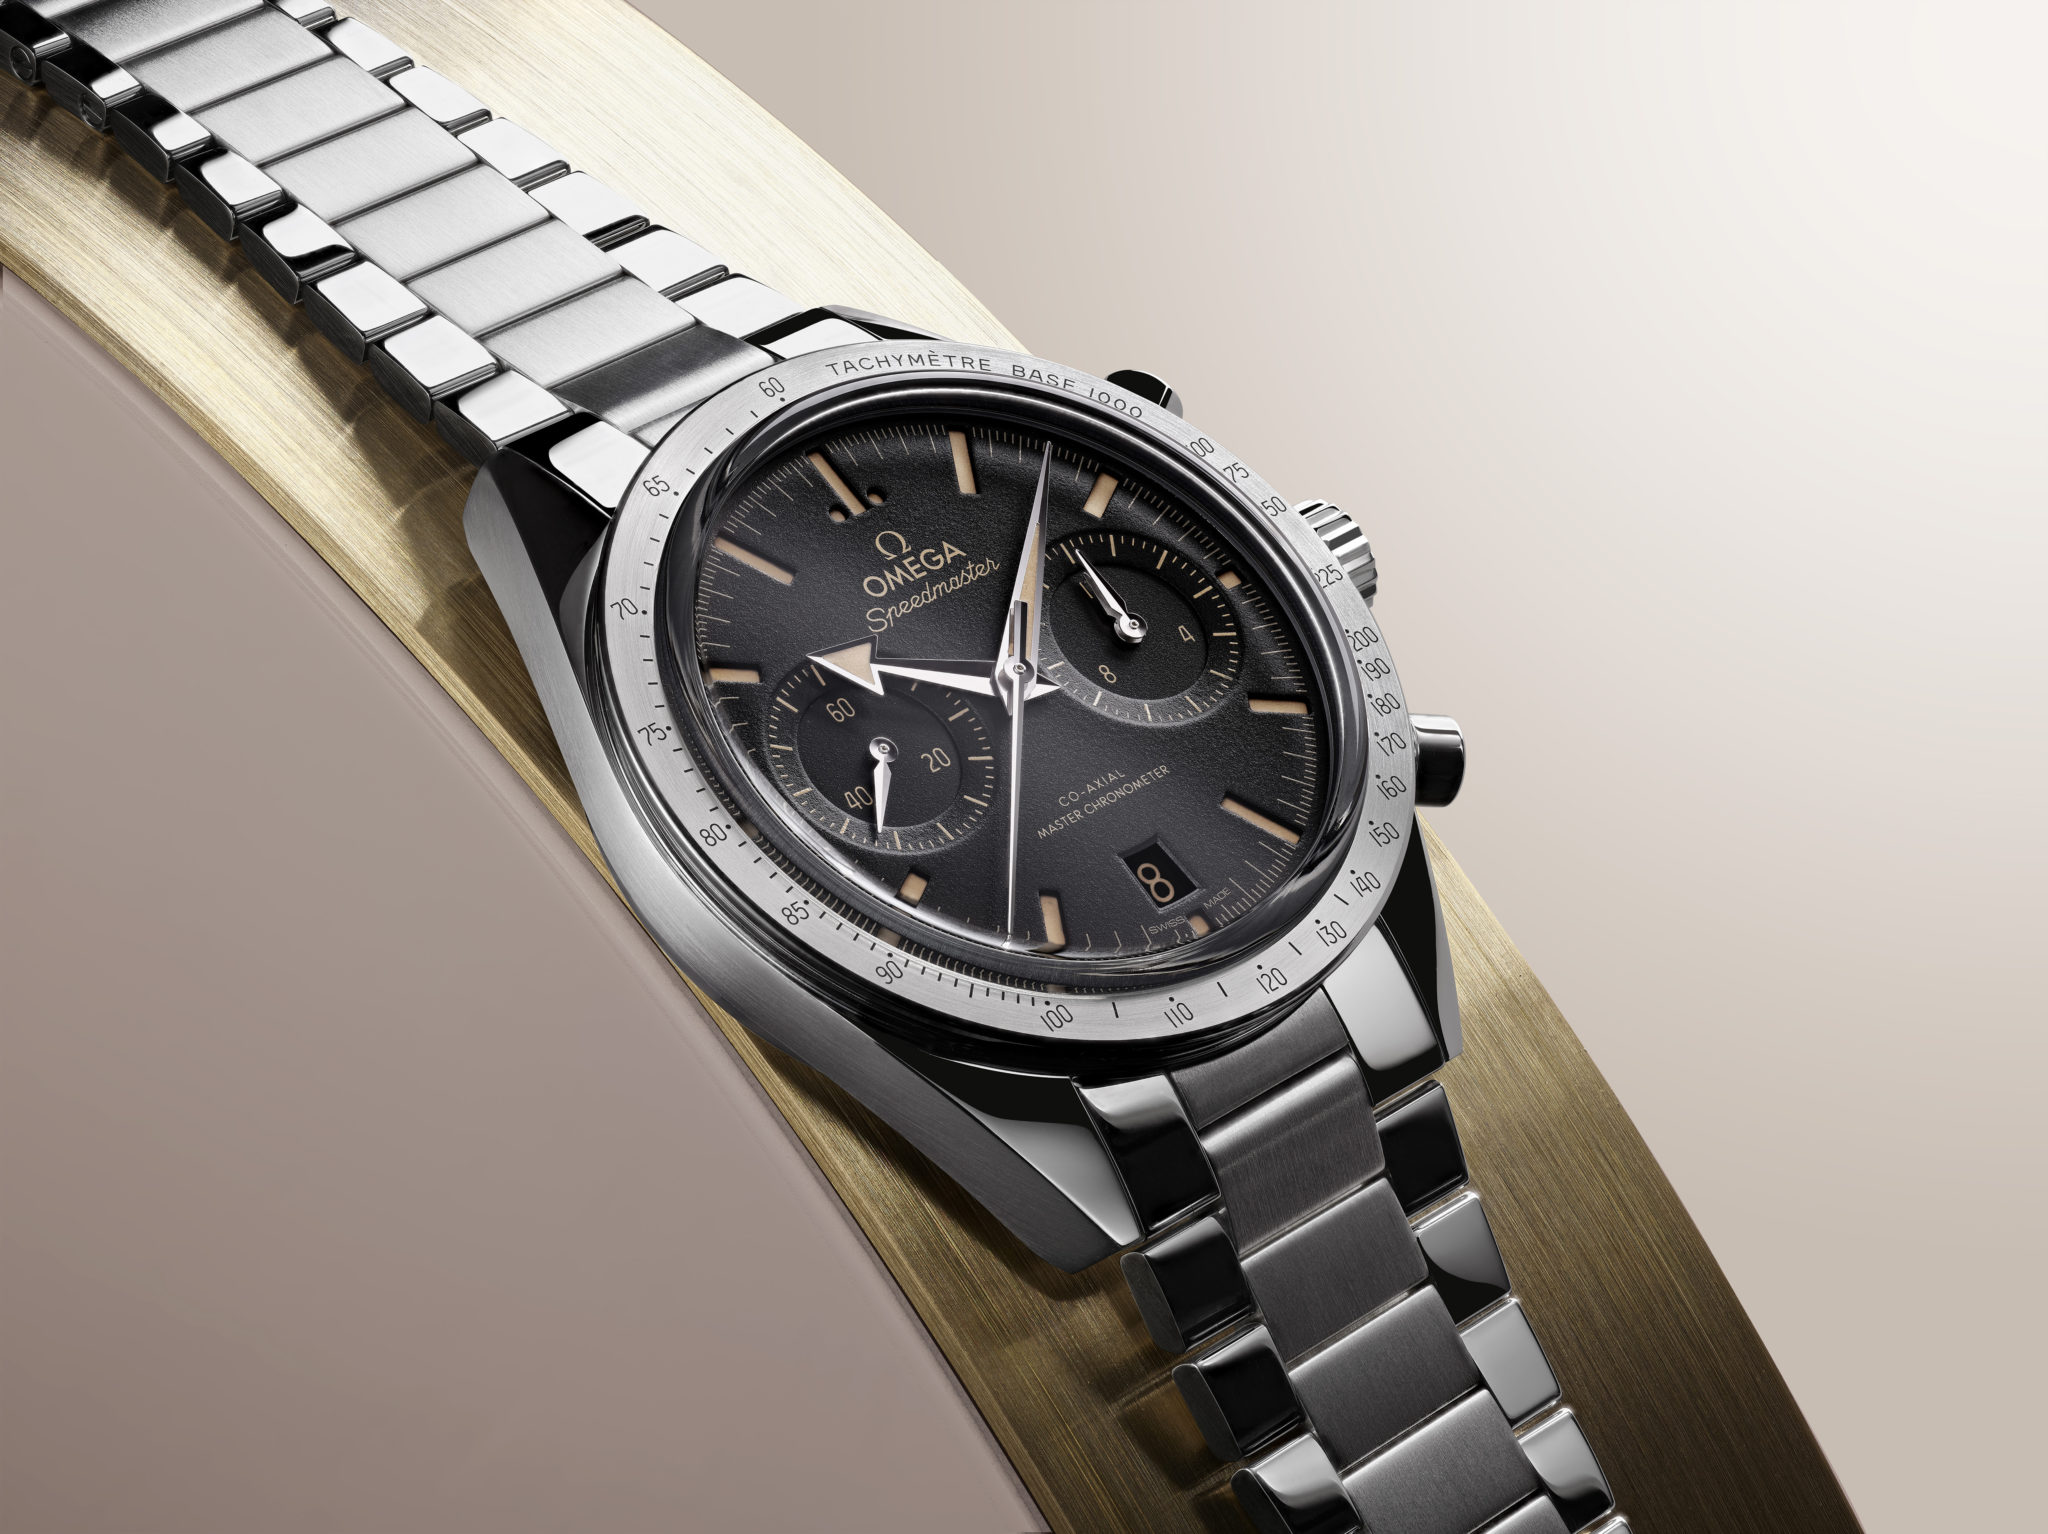 2022 Year in Review: 8 Chronographs Ready for Action